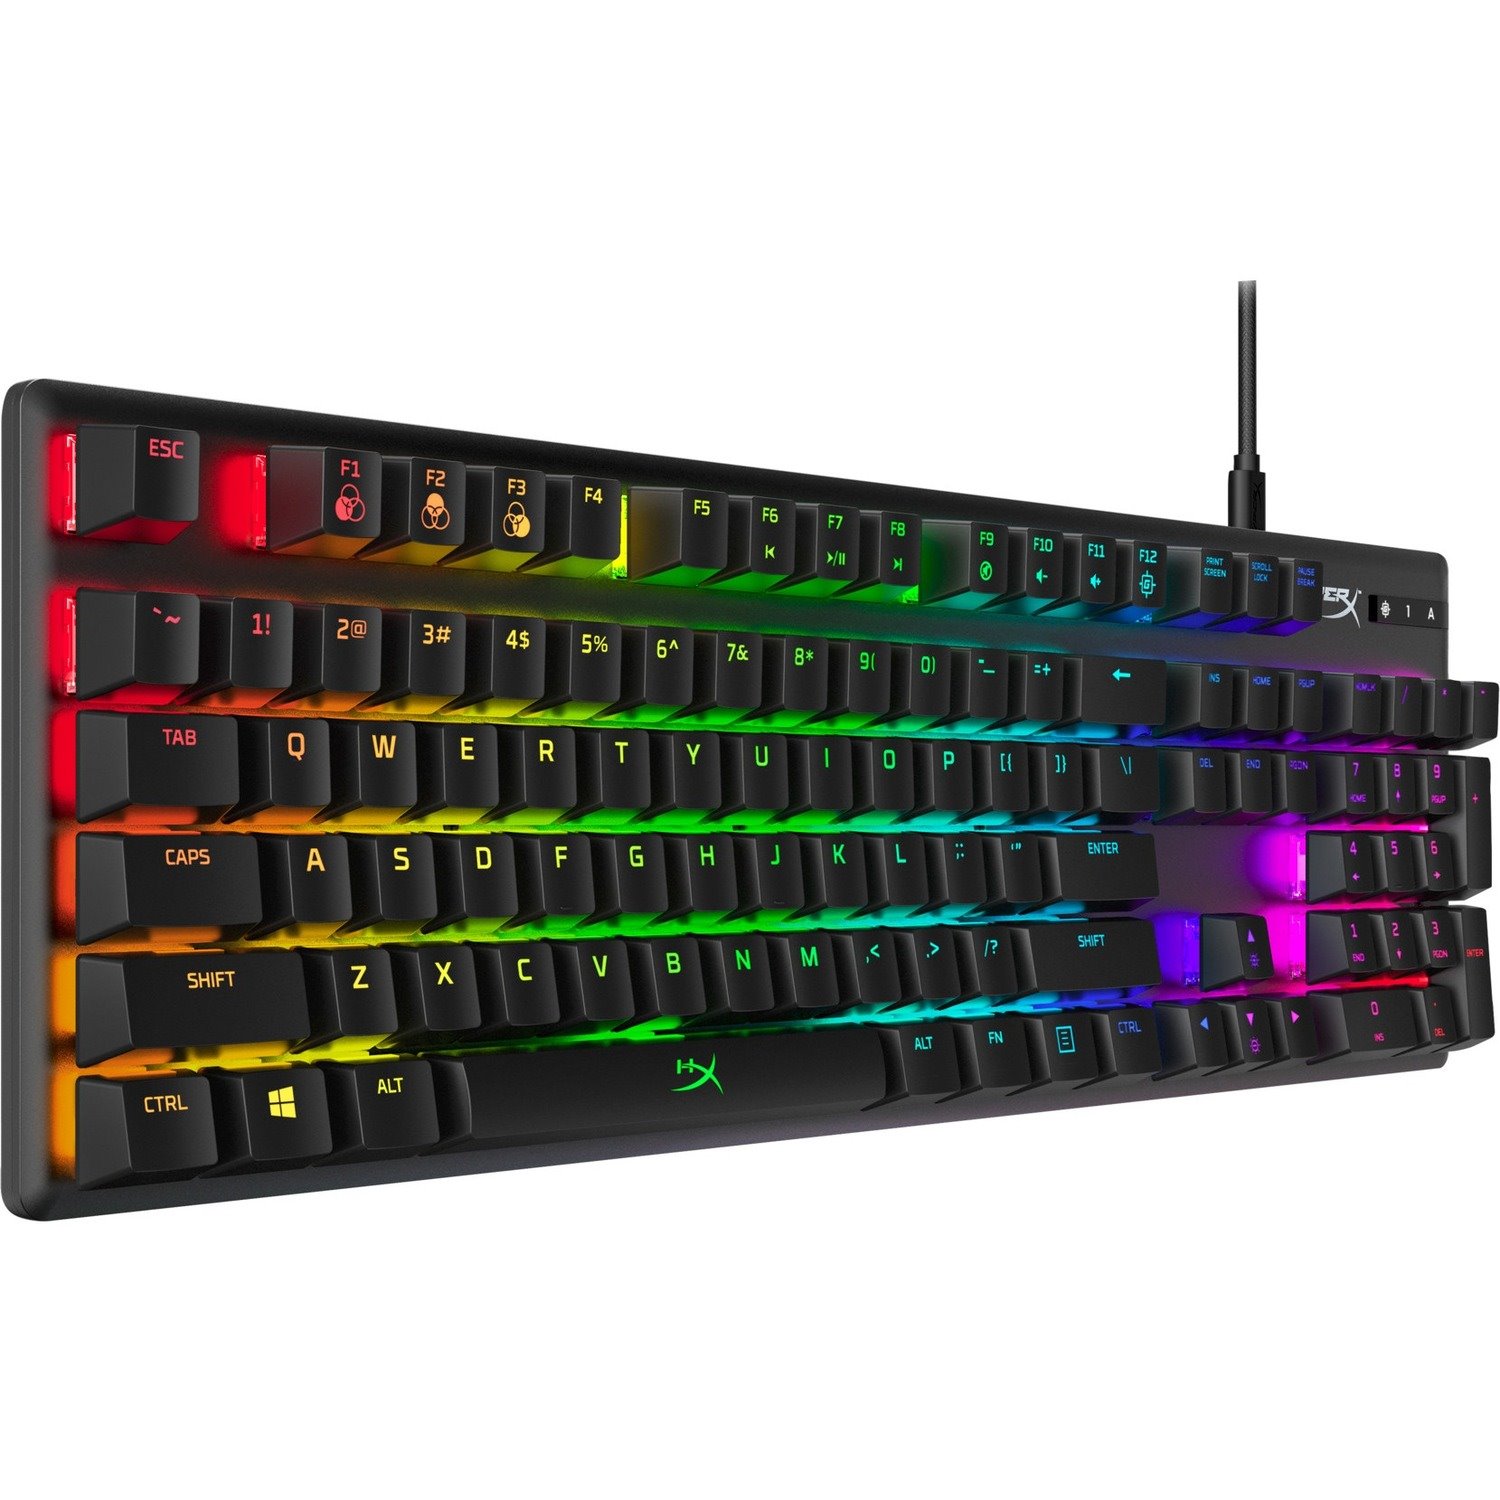 HP HyperX Alloy Gaming Keyboard - Cable Connectivity - USB Type C Interface - RGB LED - English (US) - Black